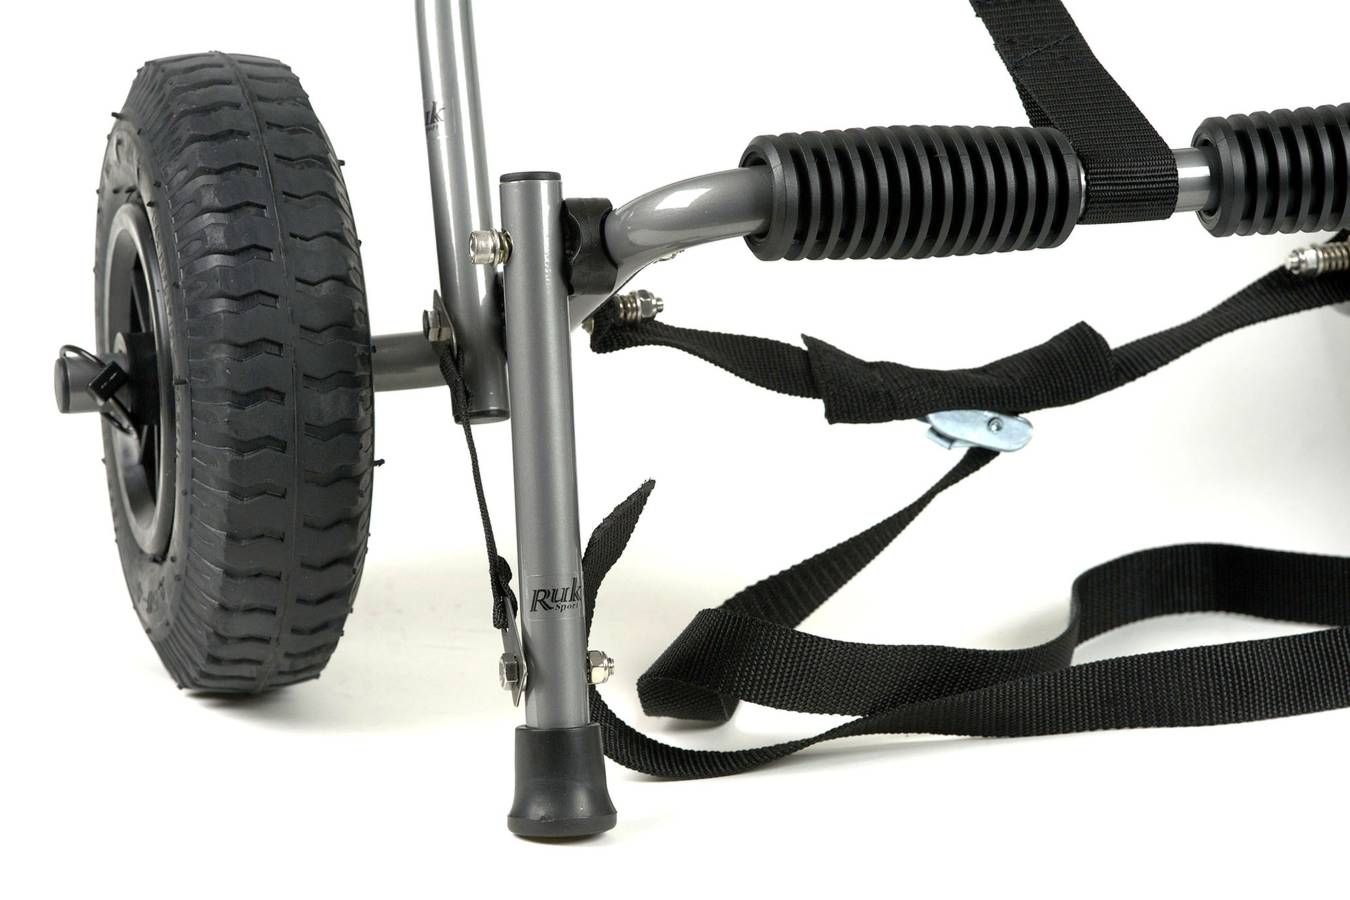 Compact folding trolley for a kayak or canoe, with puncture-proof tyres